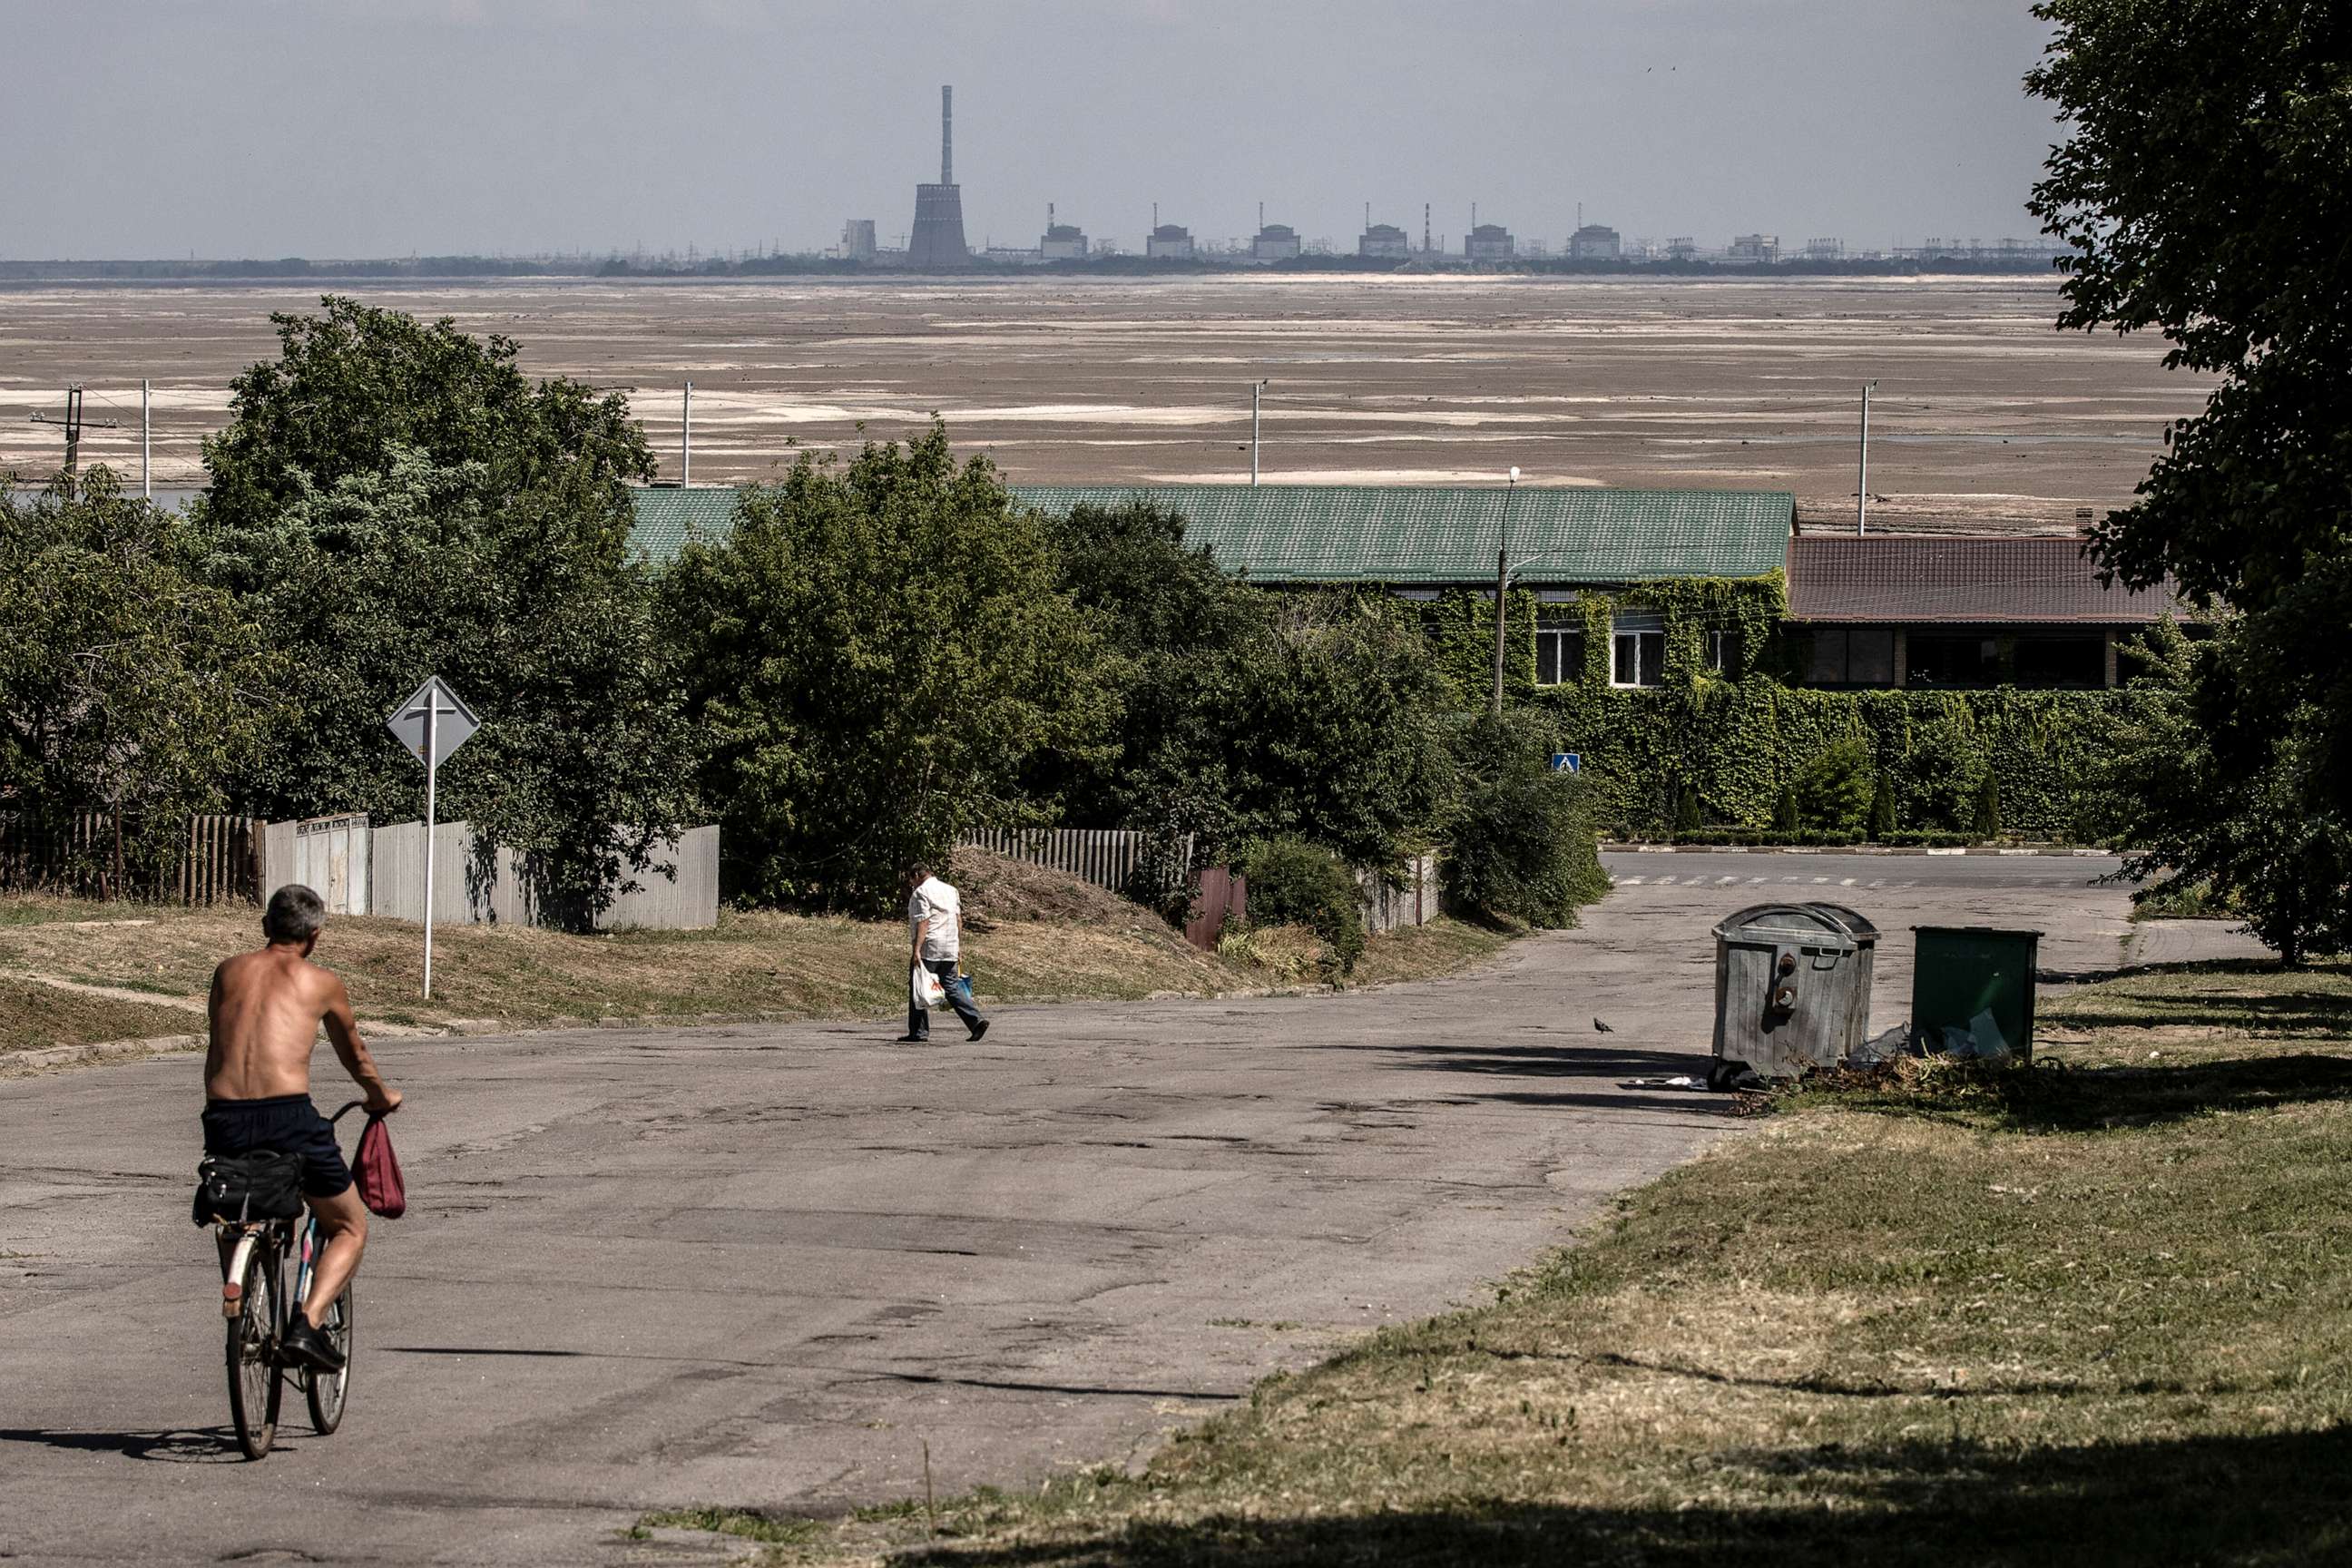 PHOTO: Residents pass along a street in Nikopol, with the Zaporizhzhia Nuclear Power Plant in the background, behind an expanse of sand exposed after the destruction of the Nova Kakhovka Dam, in Ukraine, on July 3, 2023.